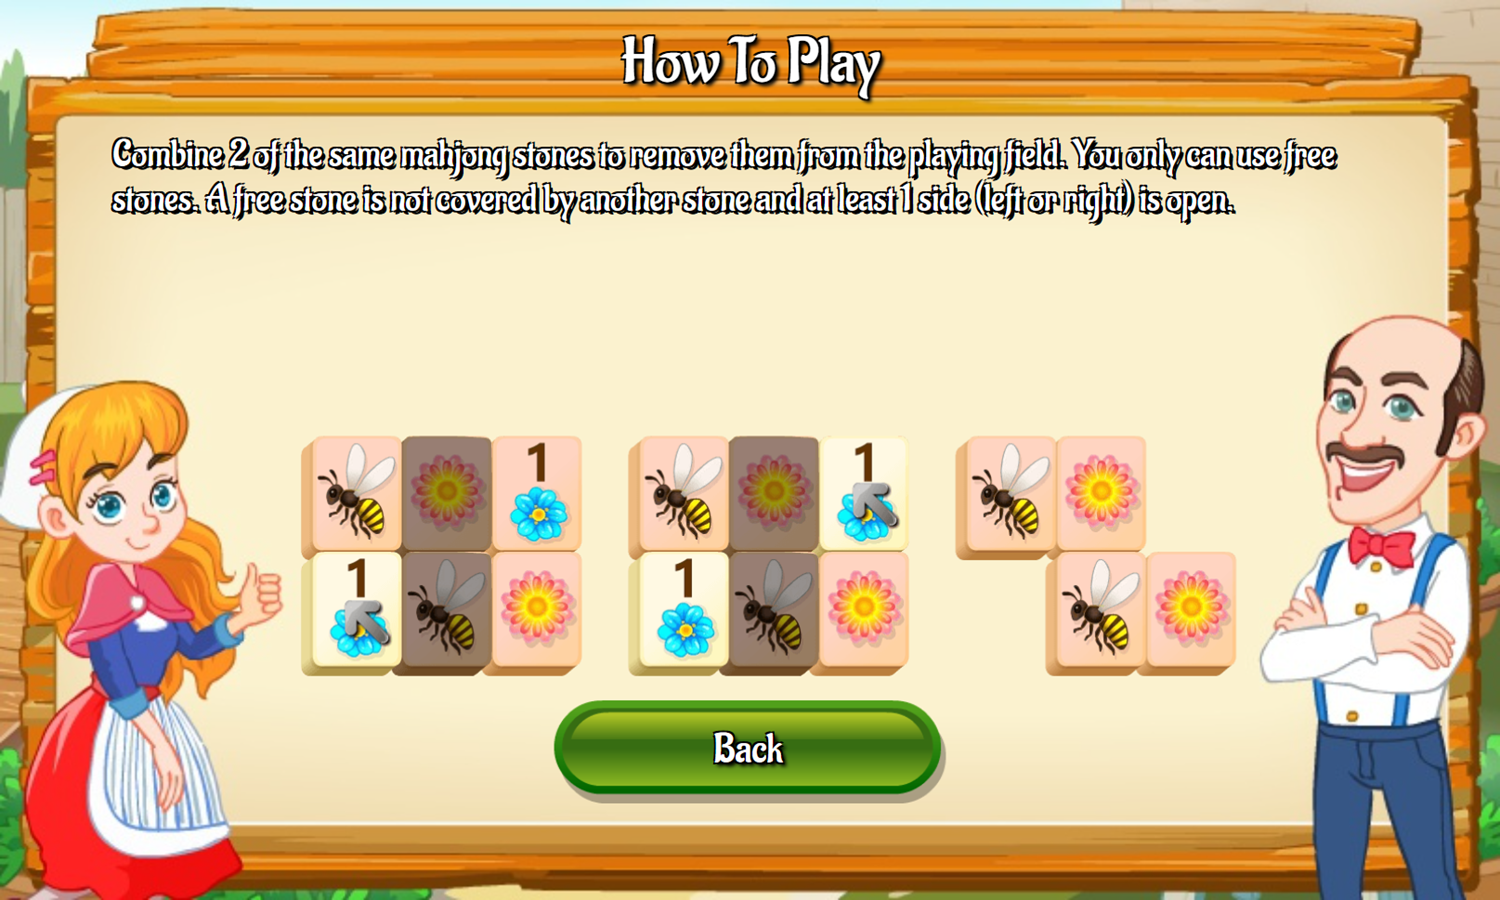 Flower Mahjong Solitaire Game How To Play Screenshot.